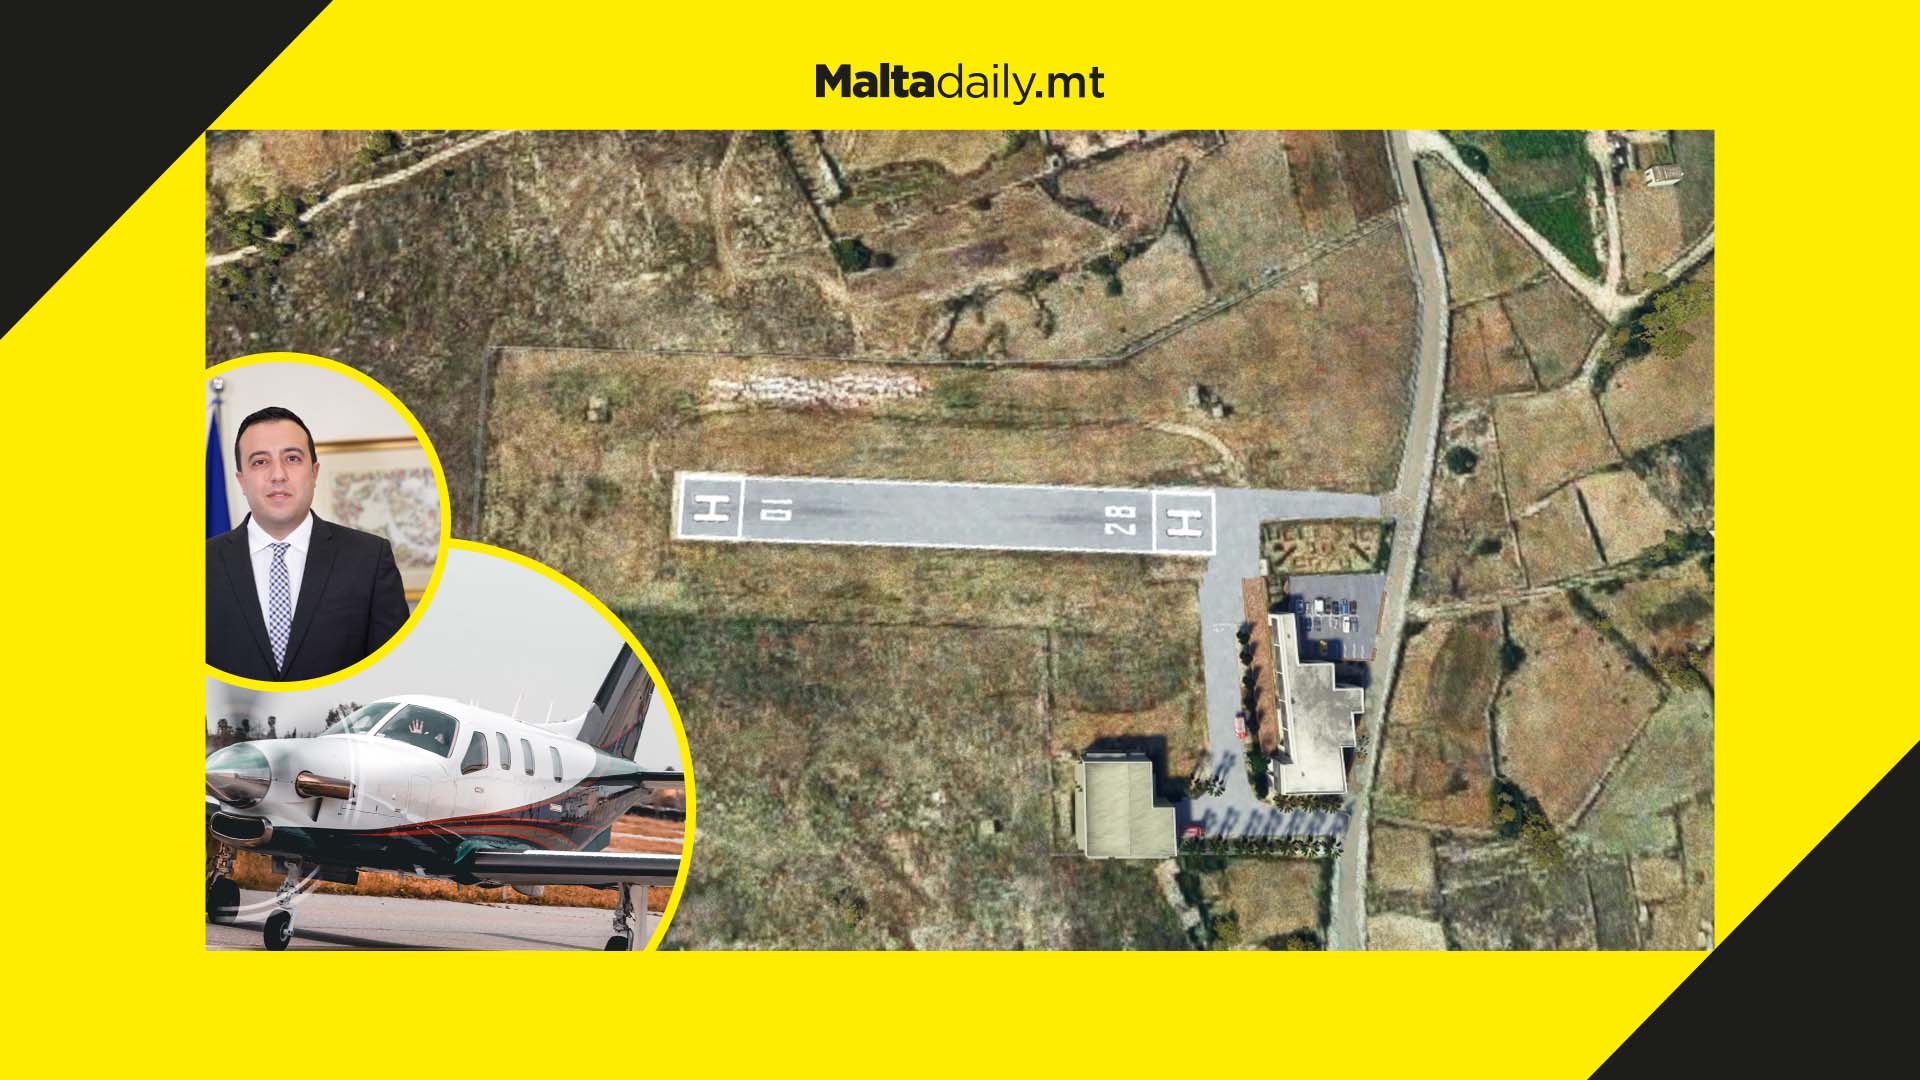 Gozo's heliport may be extended to an airport in the coming weeks